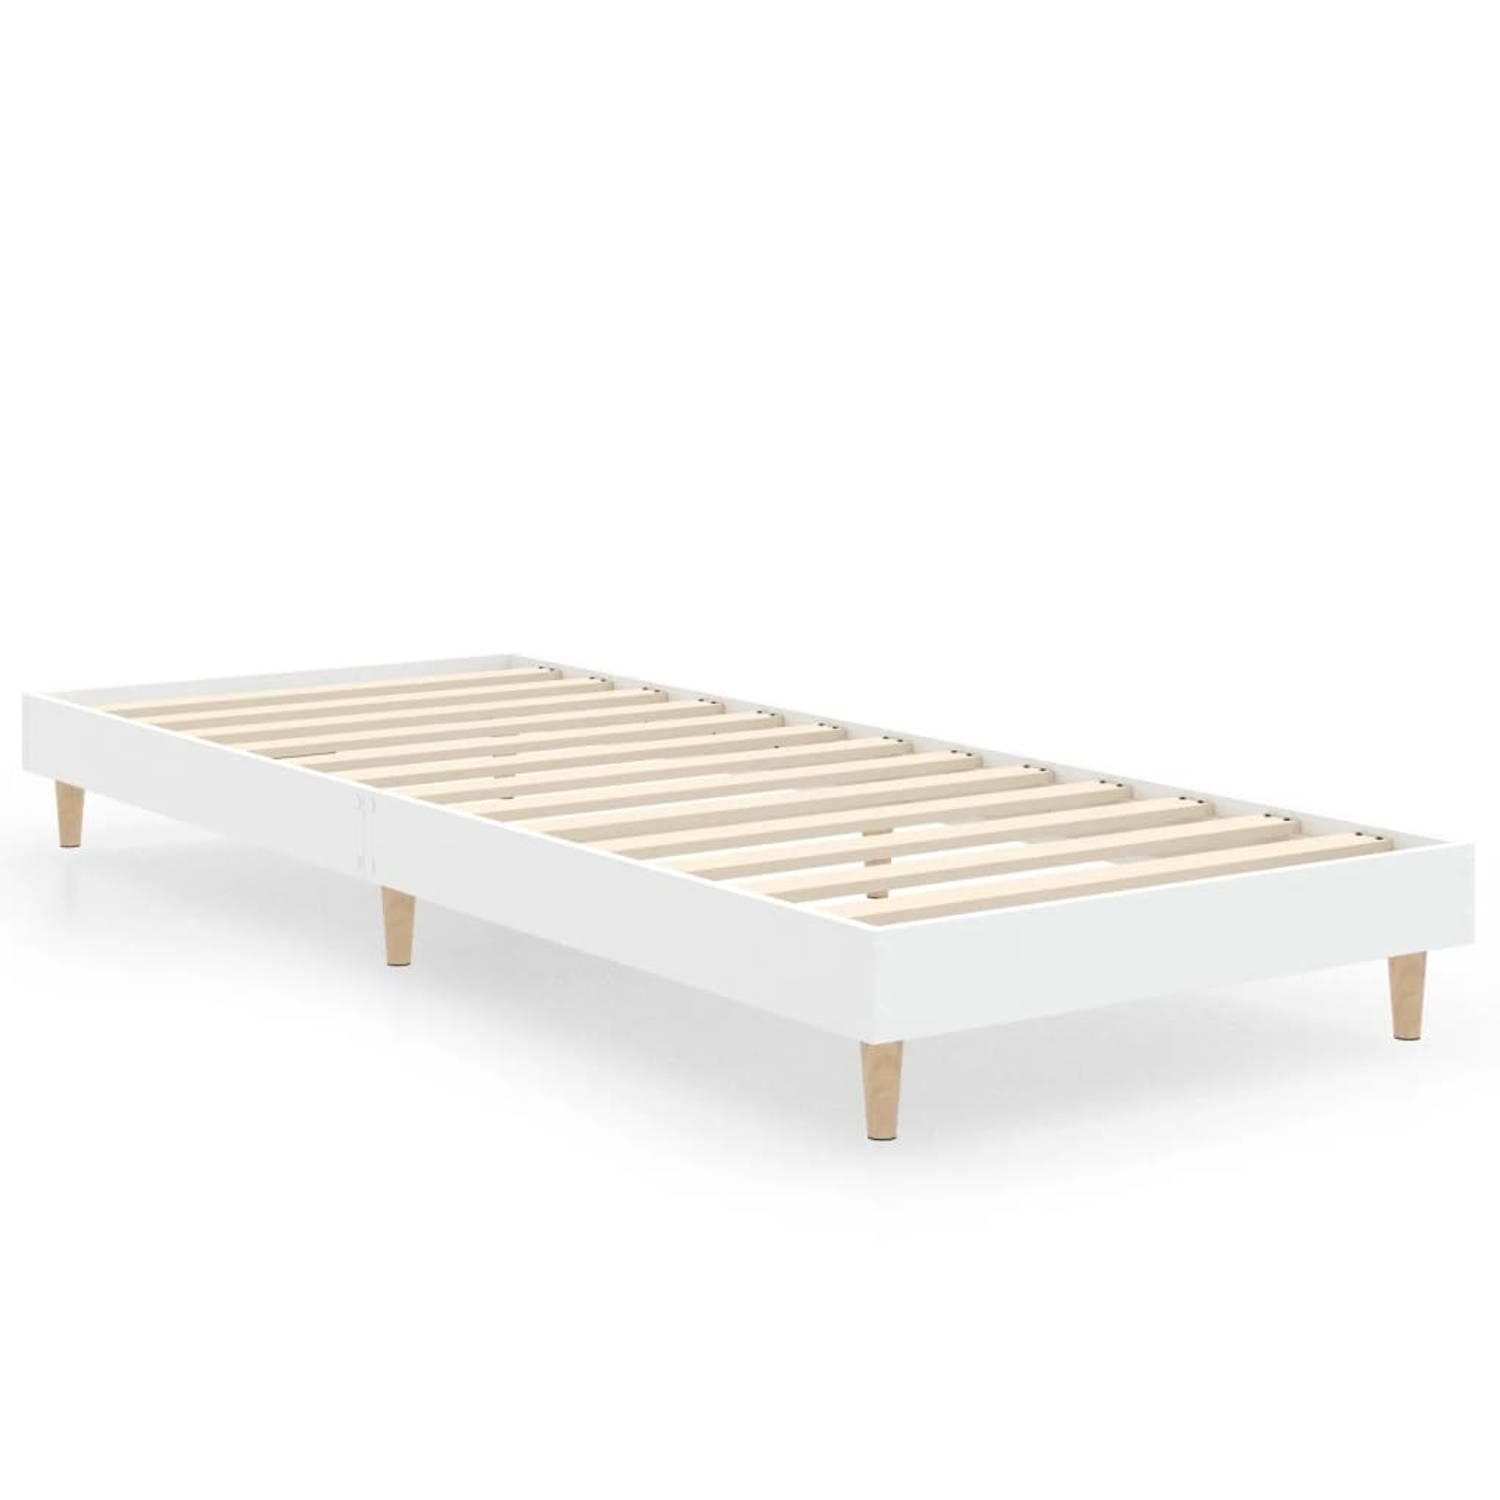 The Living Store Bedframe - Hout - 193 x 78 x 20 cm - Wit